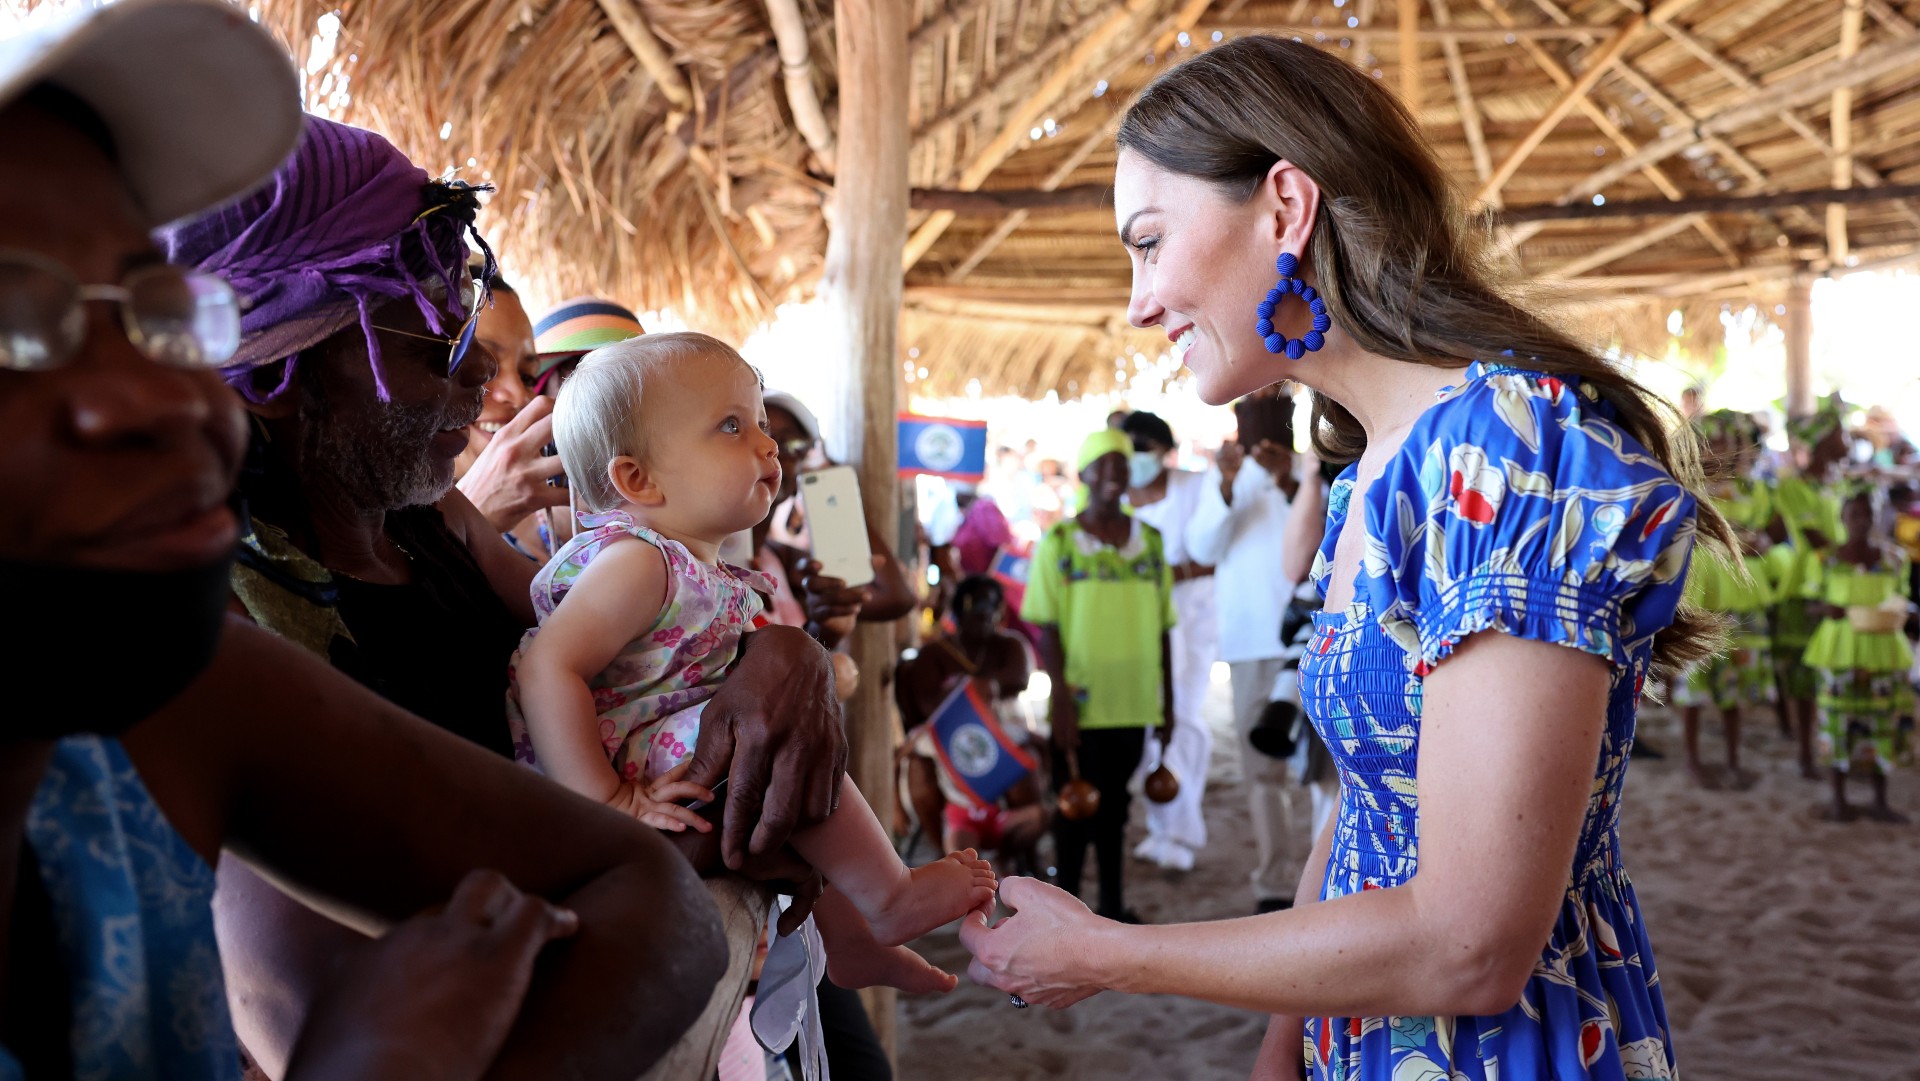 Prince William and Kate spend time with the Garifuna community 